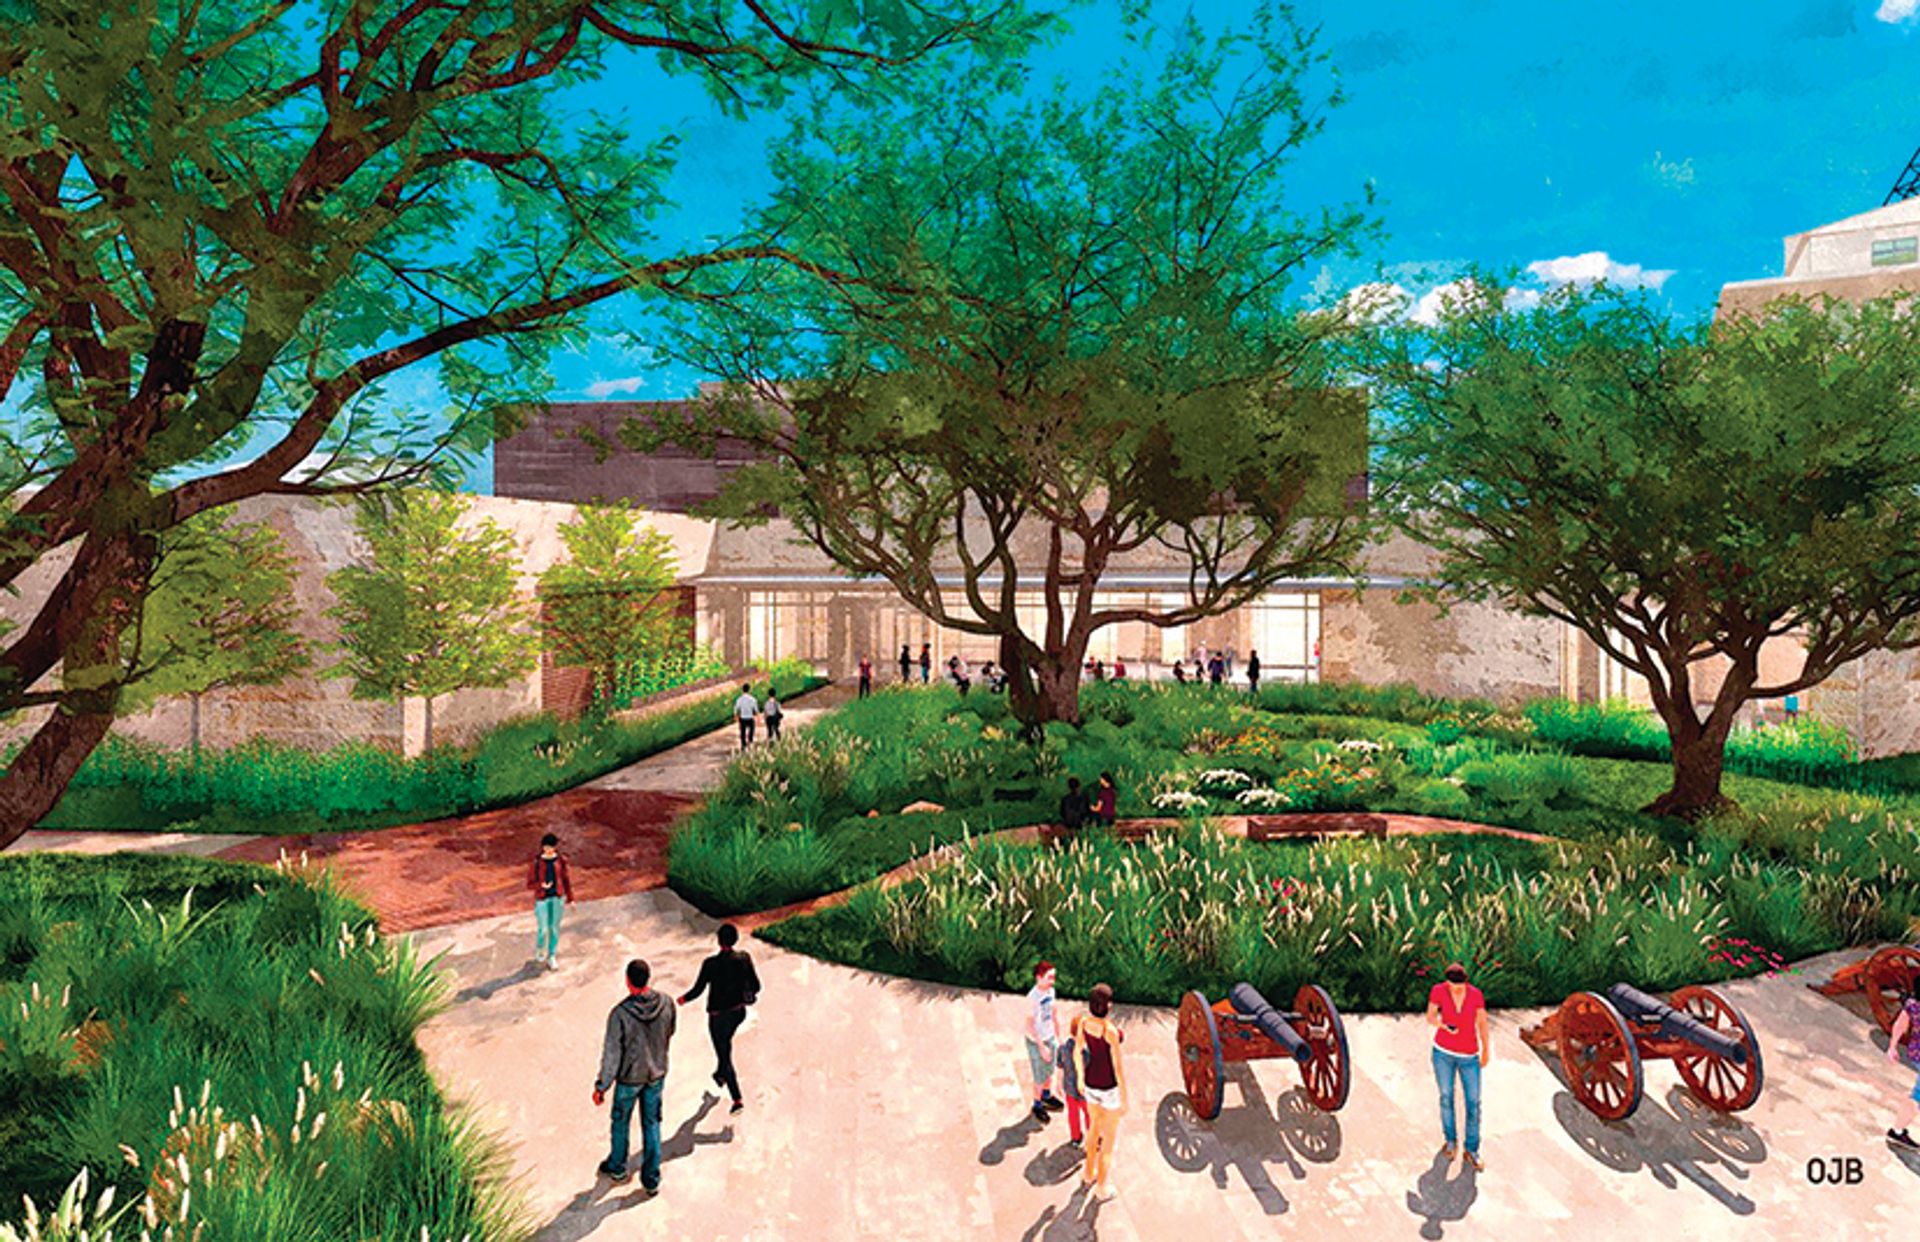 A rendering of how the planned new Alamo exhibition hall will look. The new building would sit alongside the Unesco-listed Alamo Mission fortress compound that was at the centre of the Texas Revolution battle in 1836

© Alamo Trust, Inc